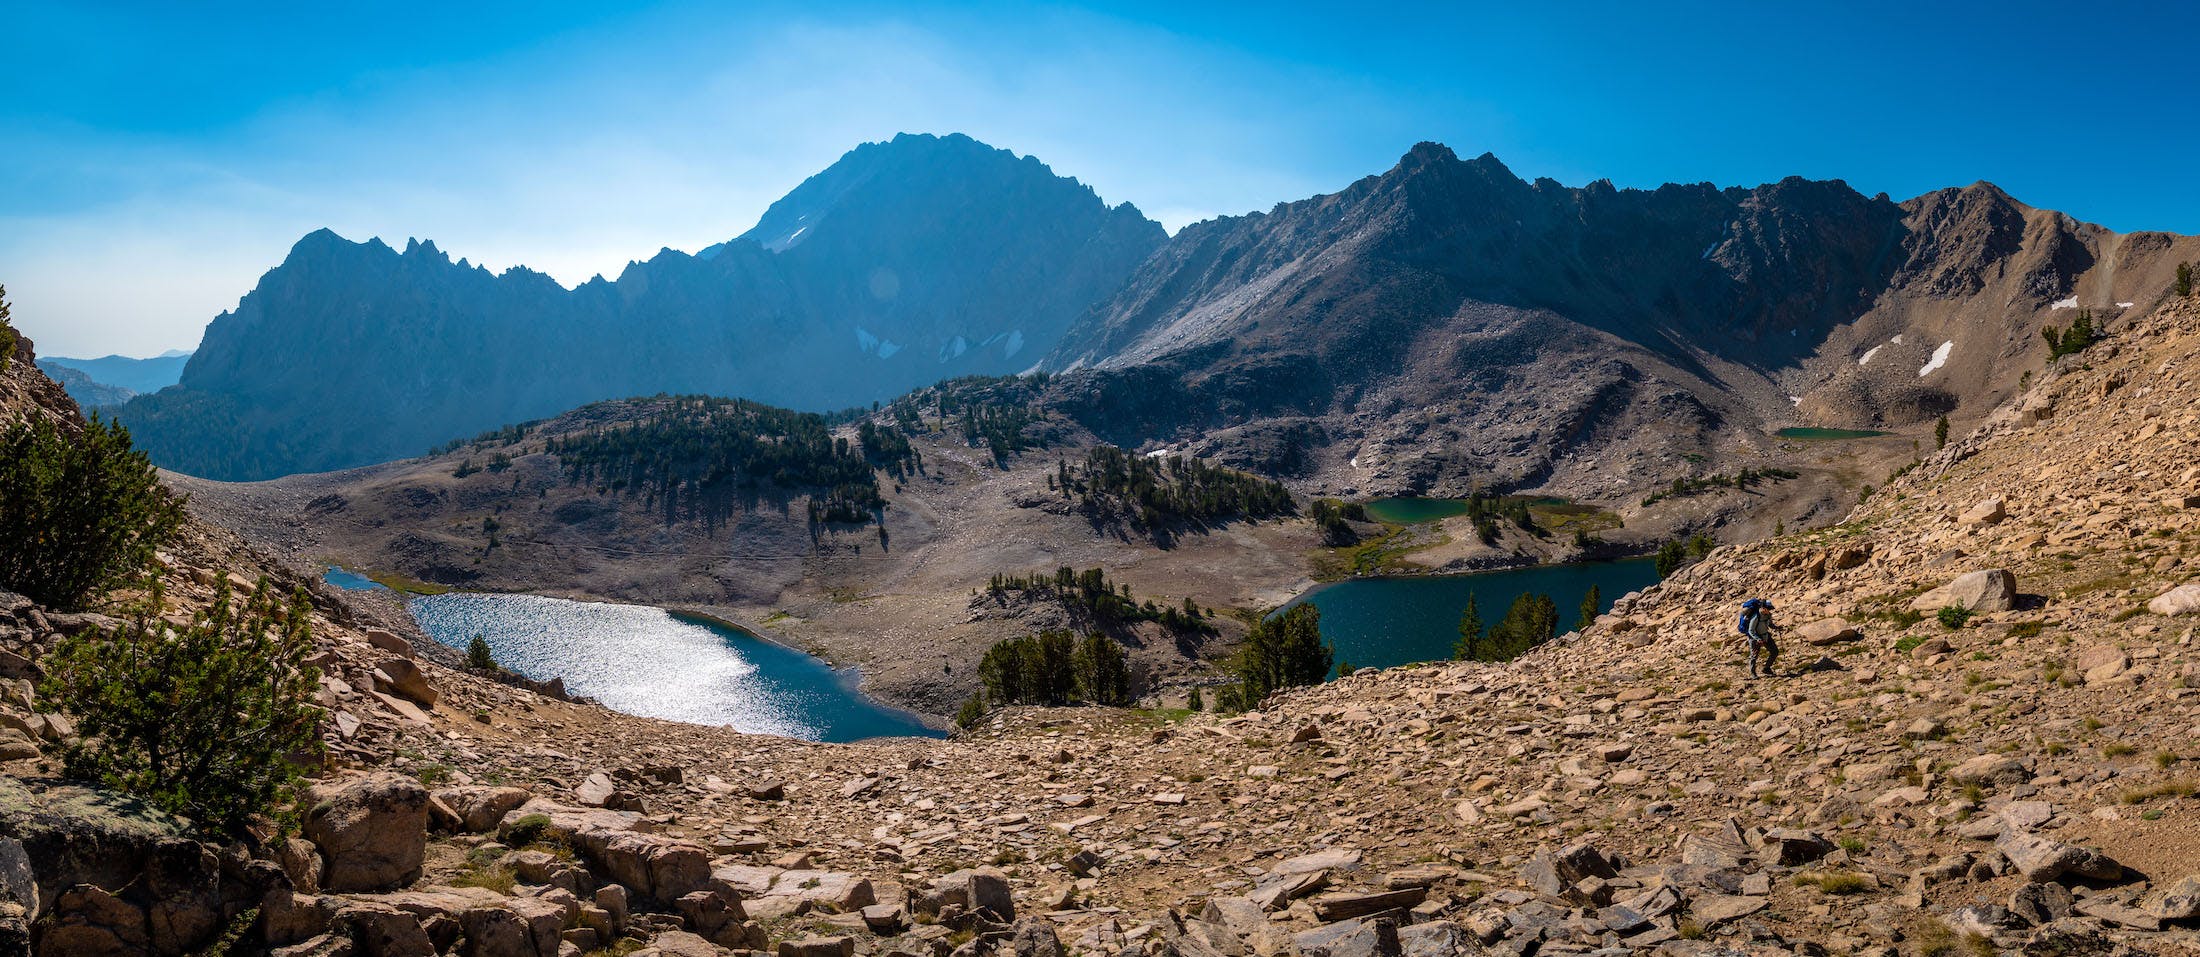 Panorama of the Four Lakes Basin in the White Clouds Mountains of Idaho